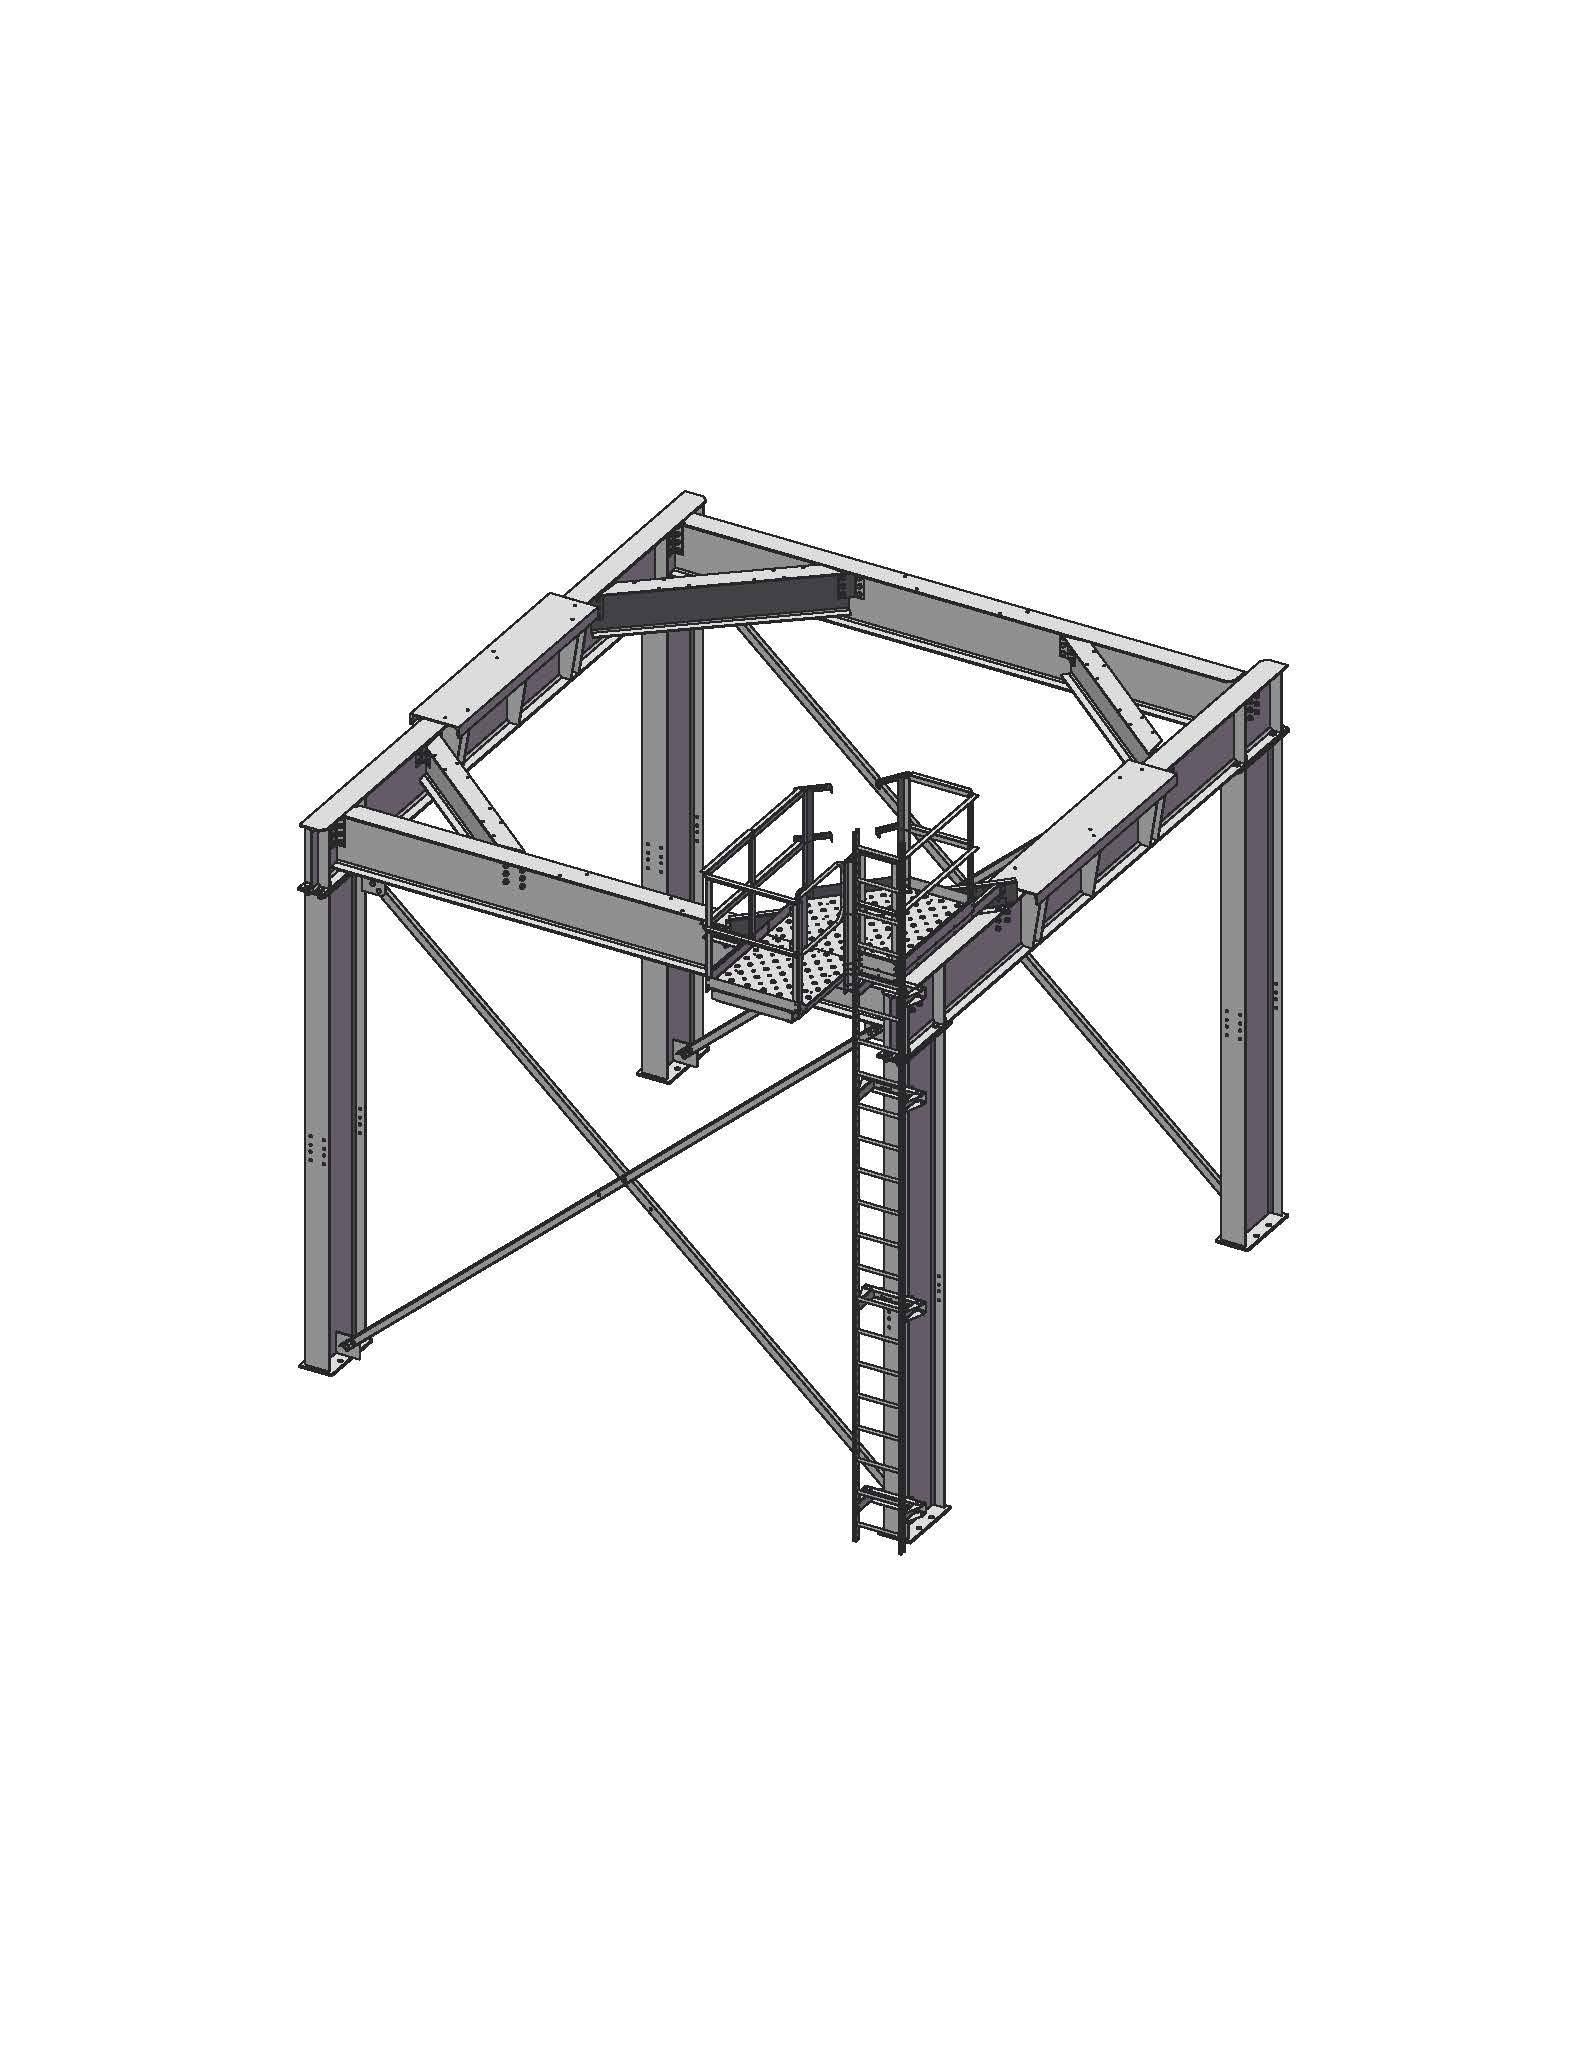 SUBSTRUCTURE WITH LADDER FROM GROUND